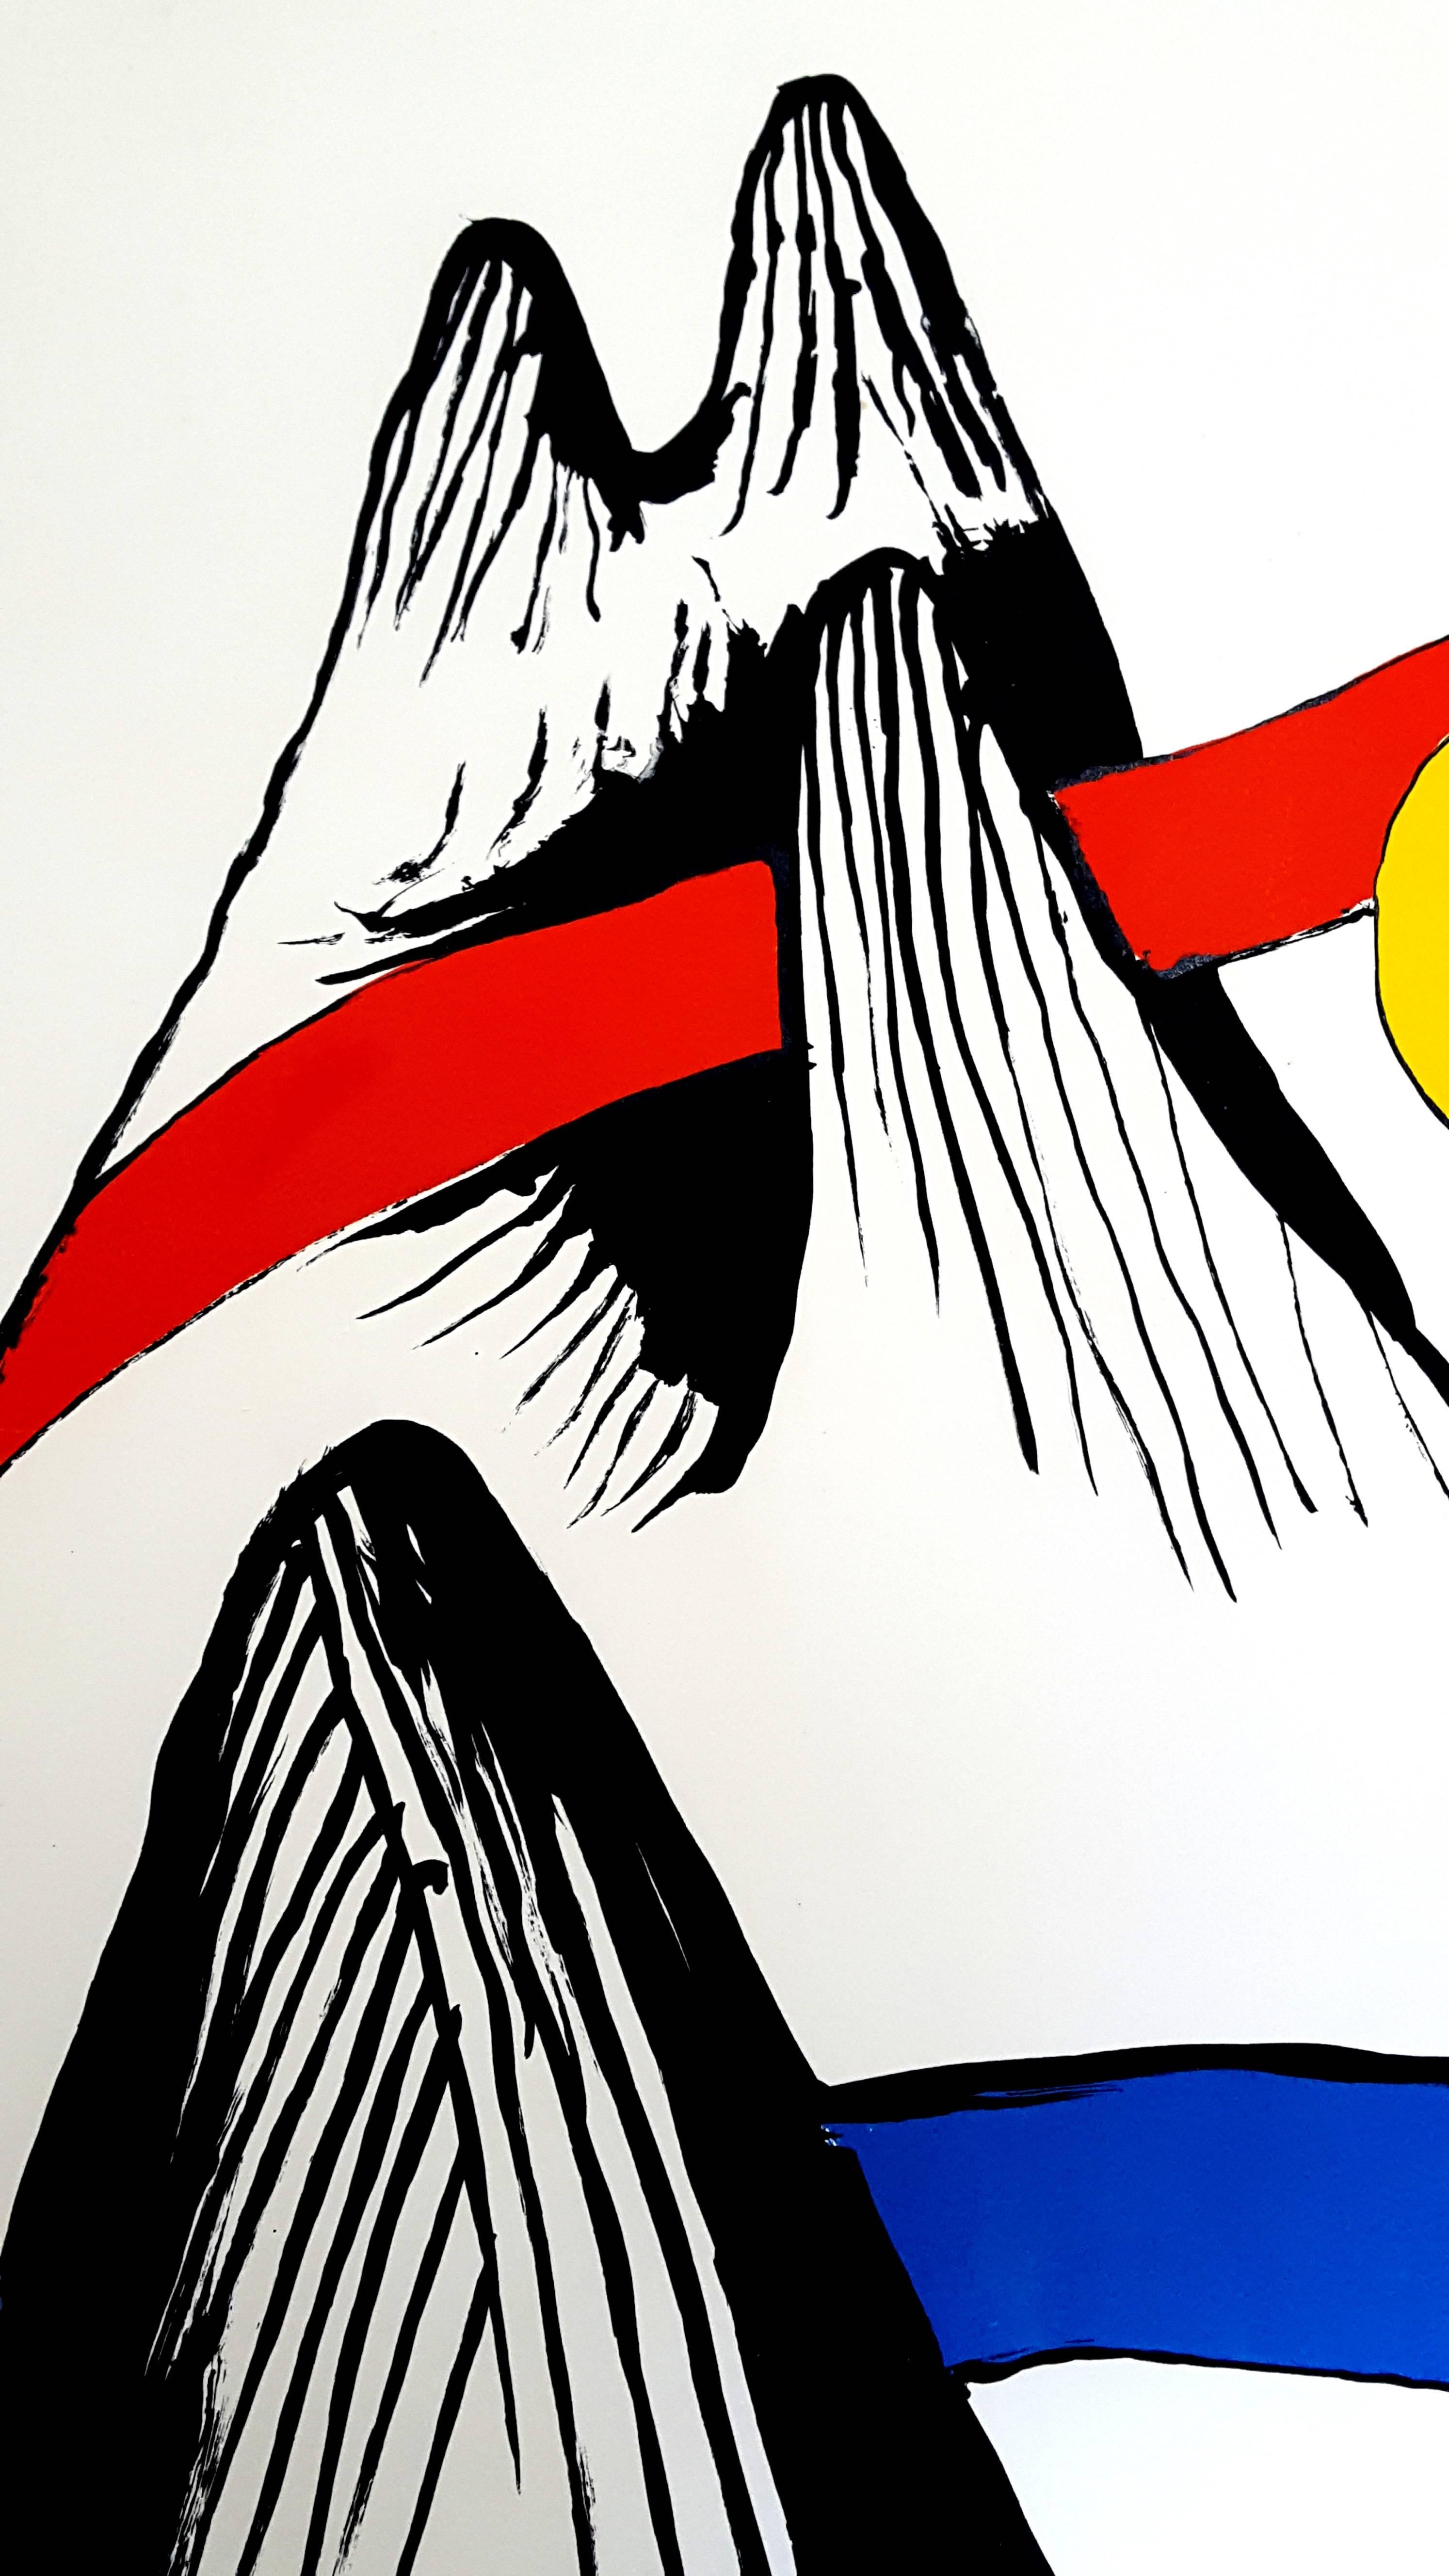 Alexander Calder - Mountain and Sun 
Handsigned Lithograph 
h: 74,20 w: 55 cm
Circa 1970 


Alexander Calder (1898 - 1976)

The American artist Alexander Calder was born in Philadelphia in 1898. He studies engineering from 1915 to 1919 at the